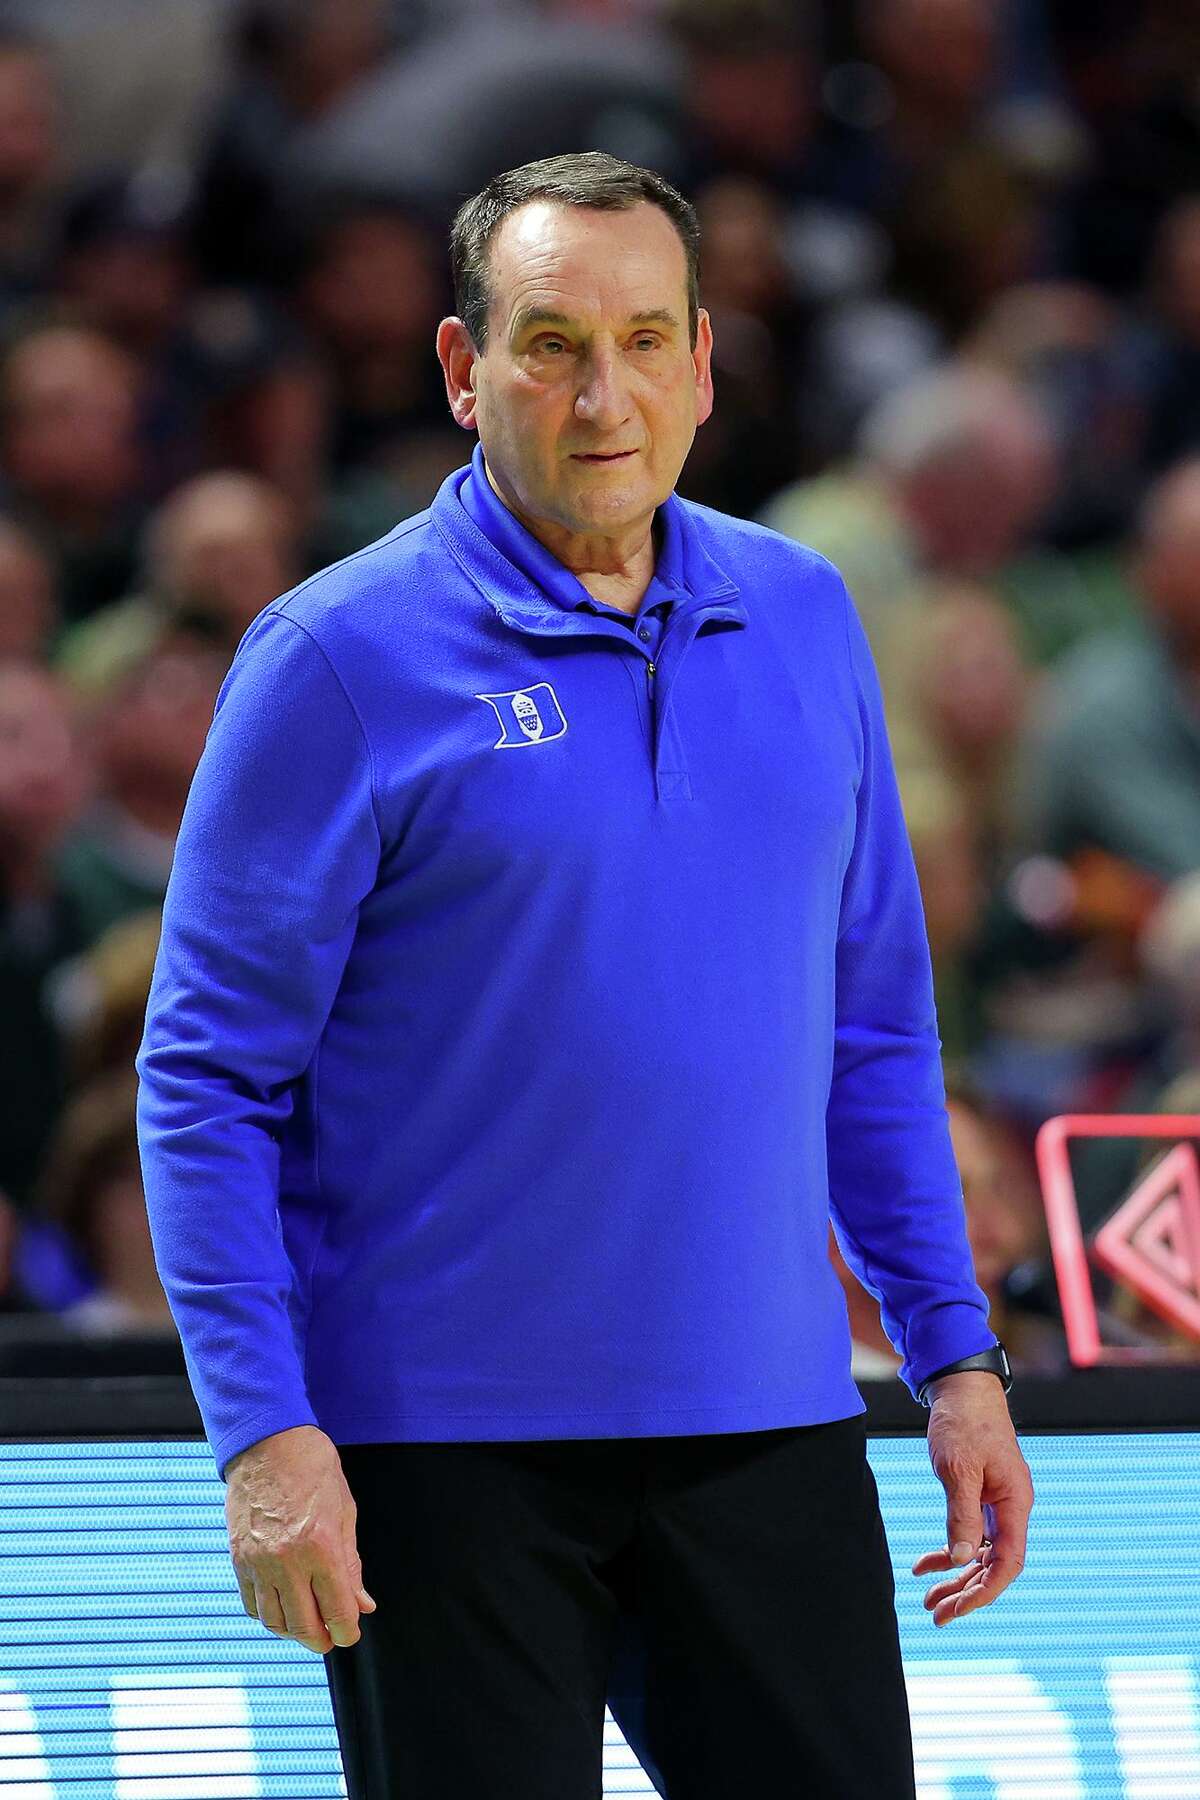 Head coach Mike Krzyzewski of the Duke Blue Devils looks on against the Cal State Fullerton Titans during the second half in the first-round game of the 2022 NCAA Men's Basketball Tournament at Bon Secours Wellness Arena on March 18, 2022, in Greenville, South Carolina. (Kevin C. Cox/Getty Images/TNS)